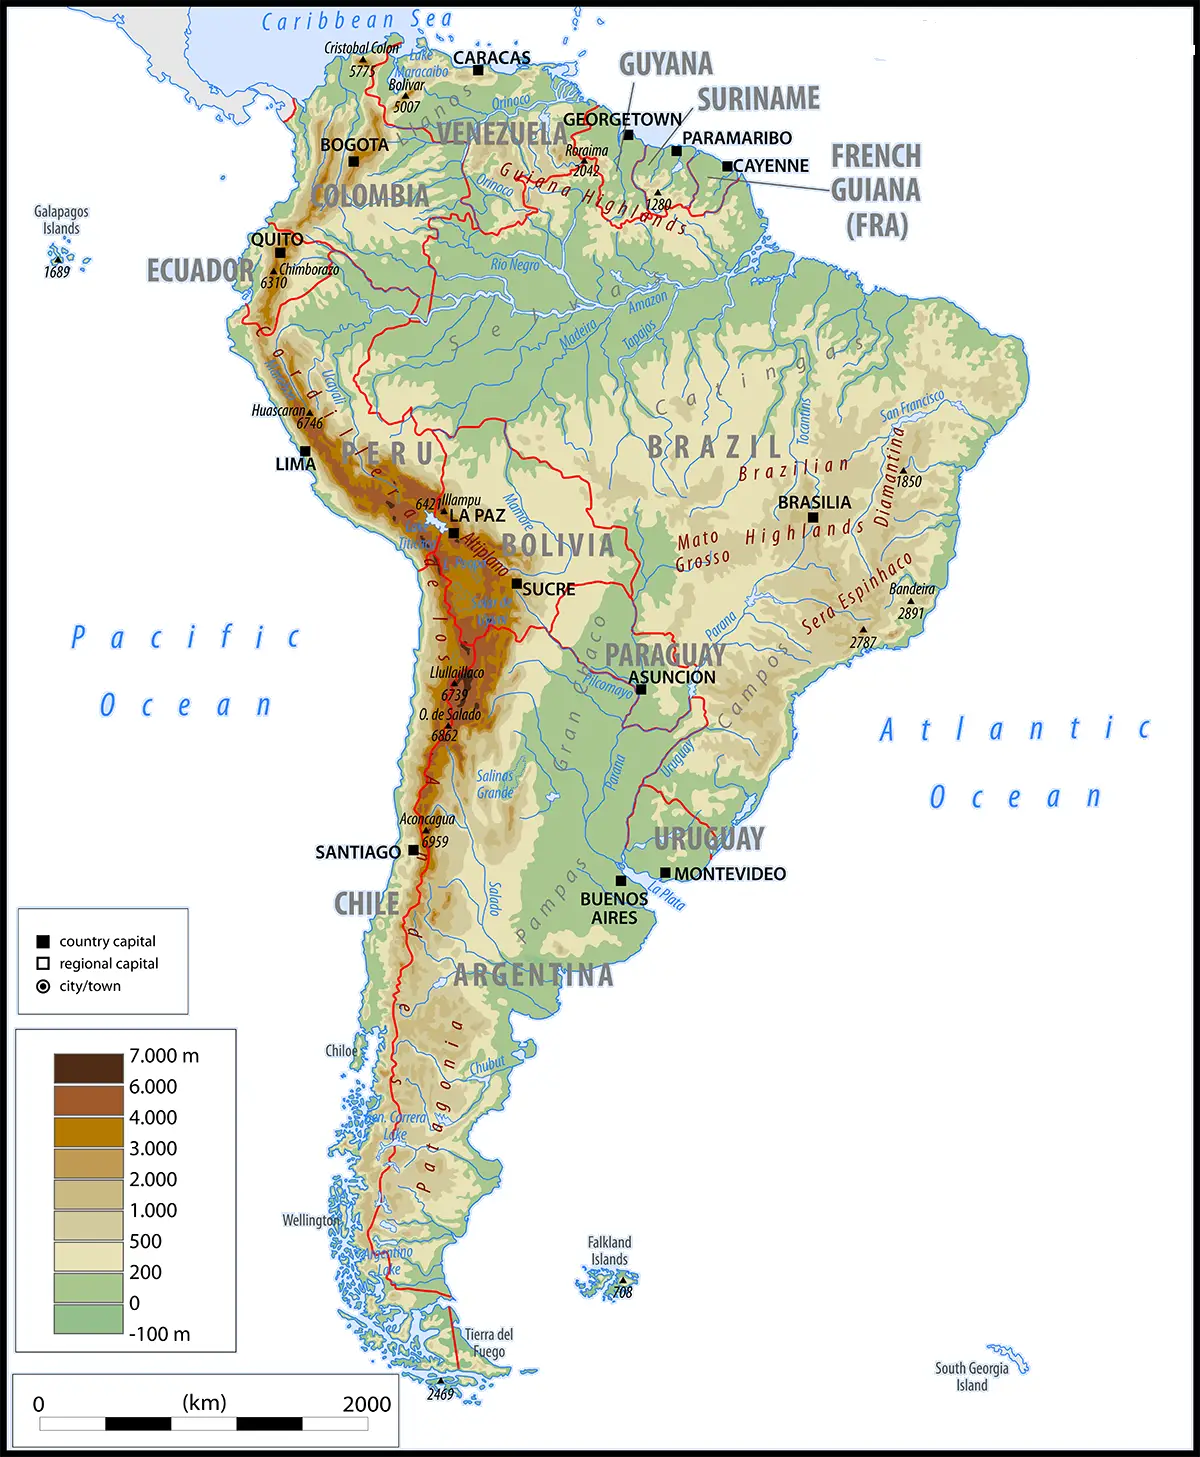 WBBSE Notes For Class 8 Geography Chapter 10 South America South America Physical